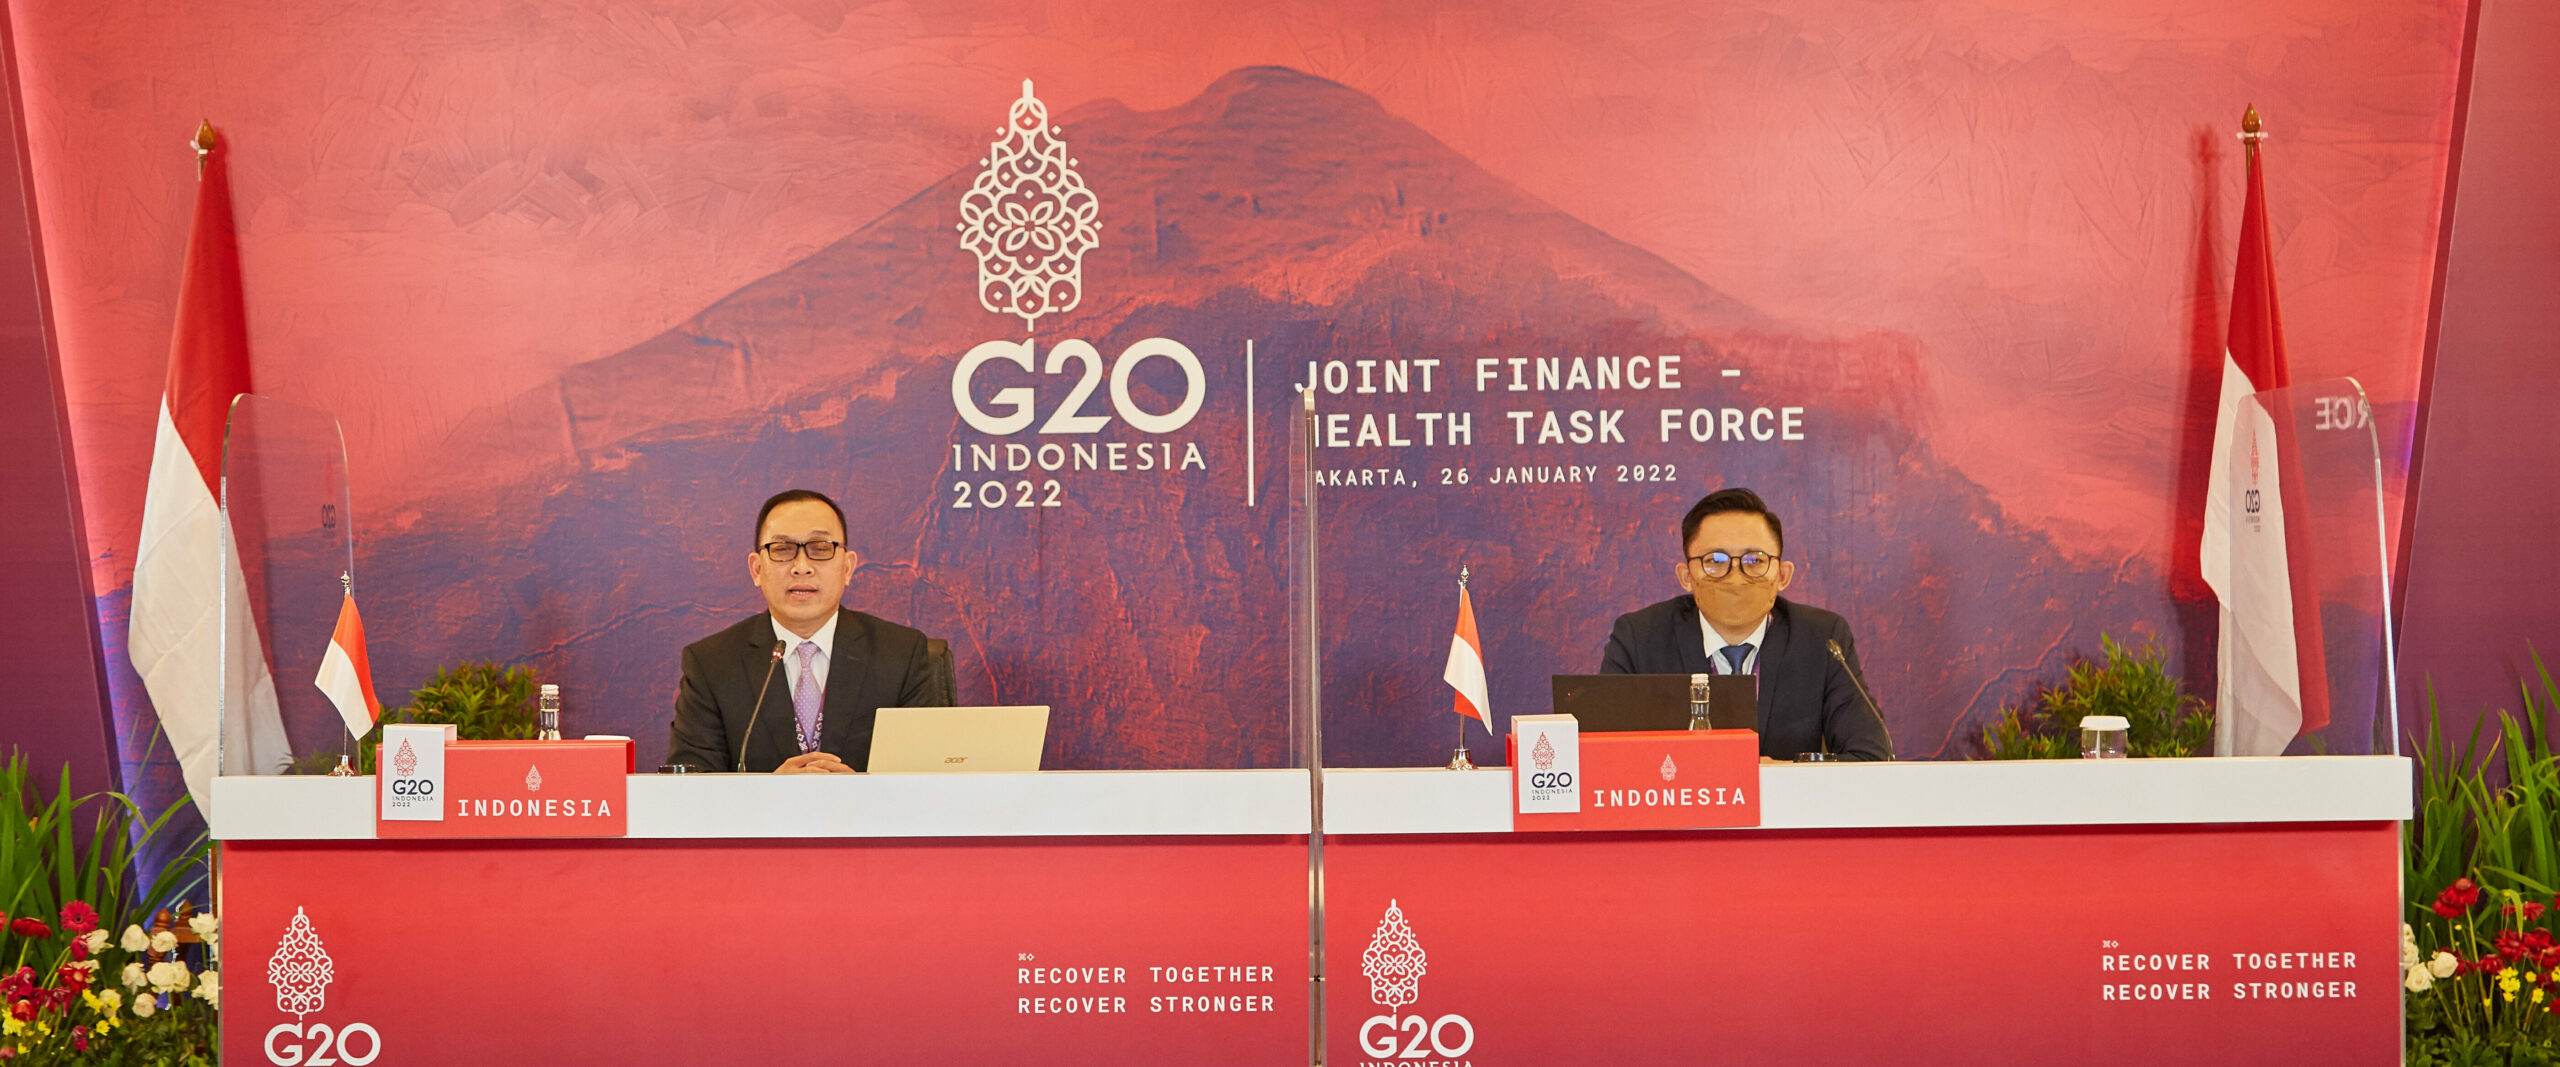 G20 Health and Finance Indonesia